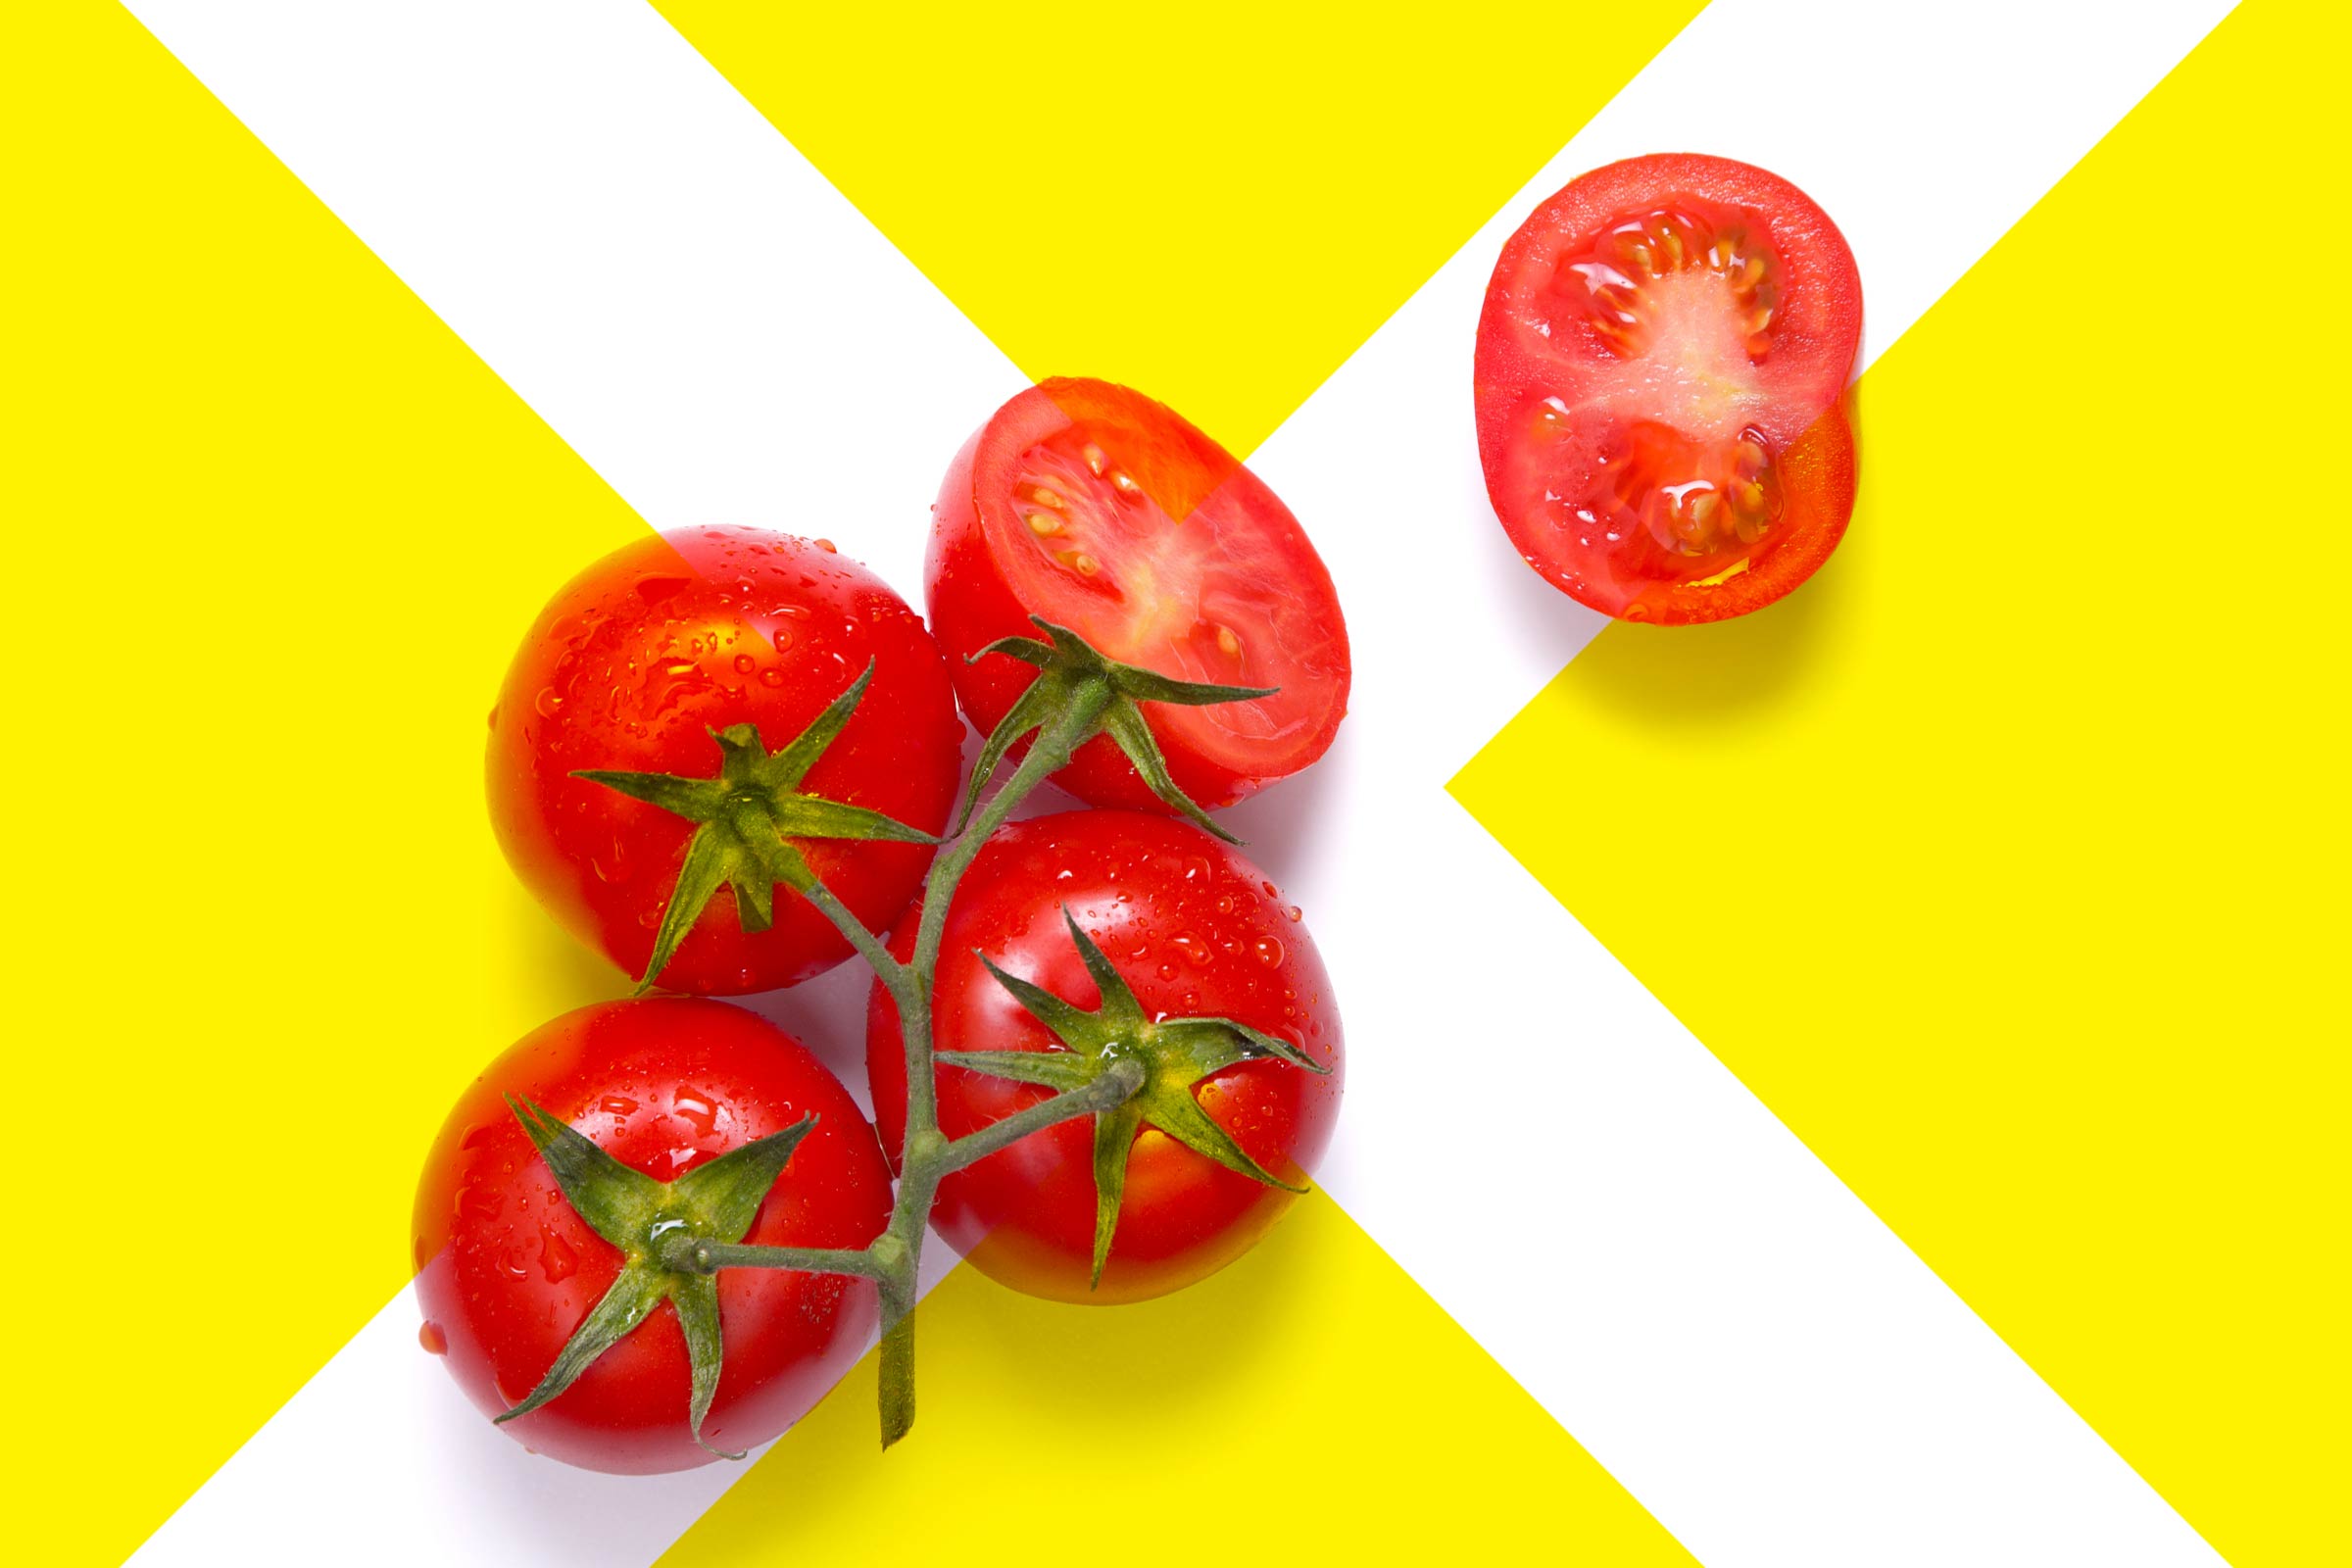 Healthy Vegetables That Can Harm You | Reader's Digest